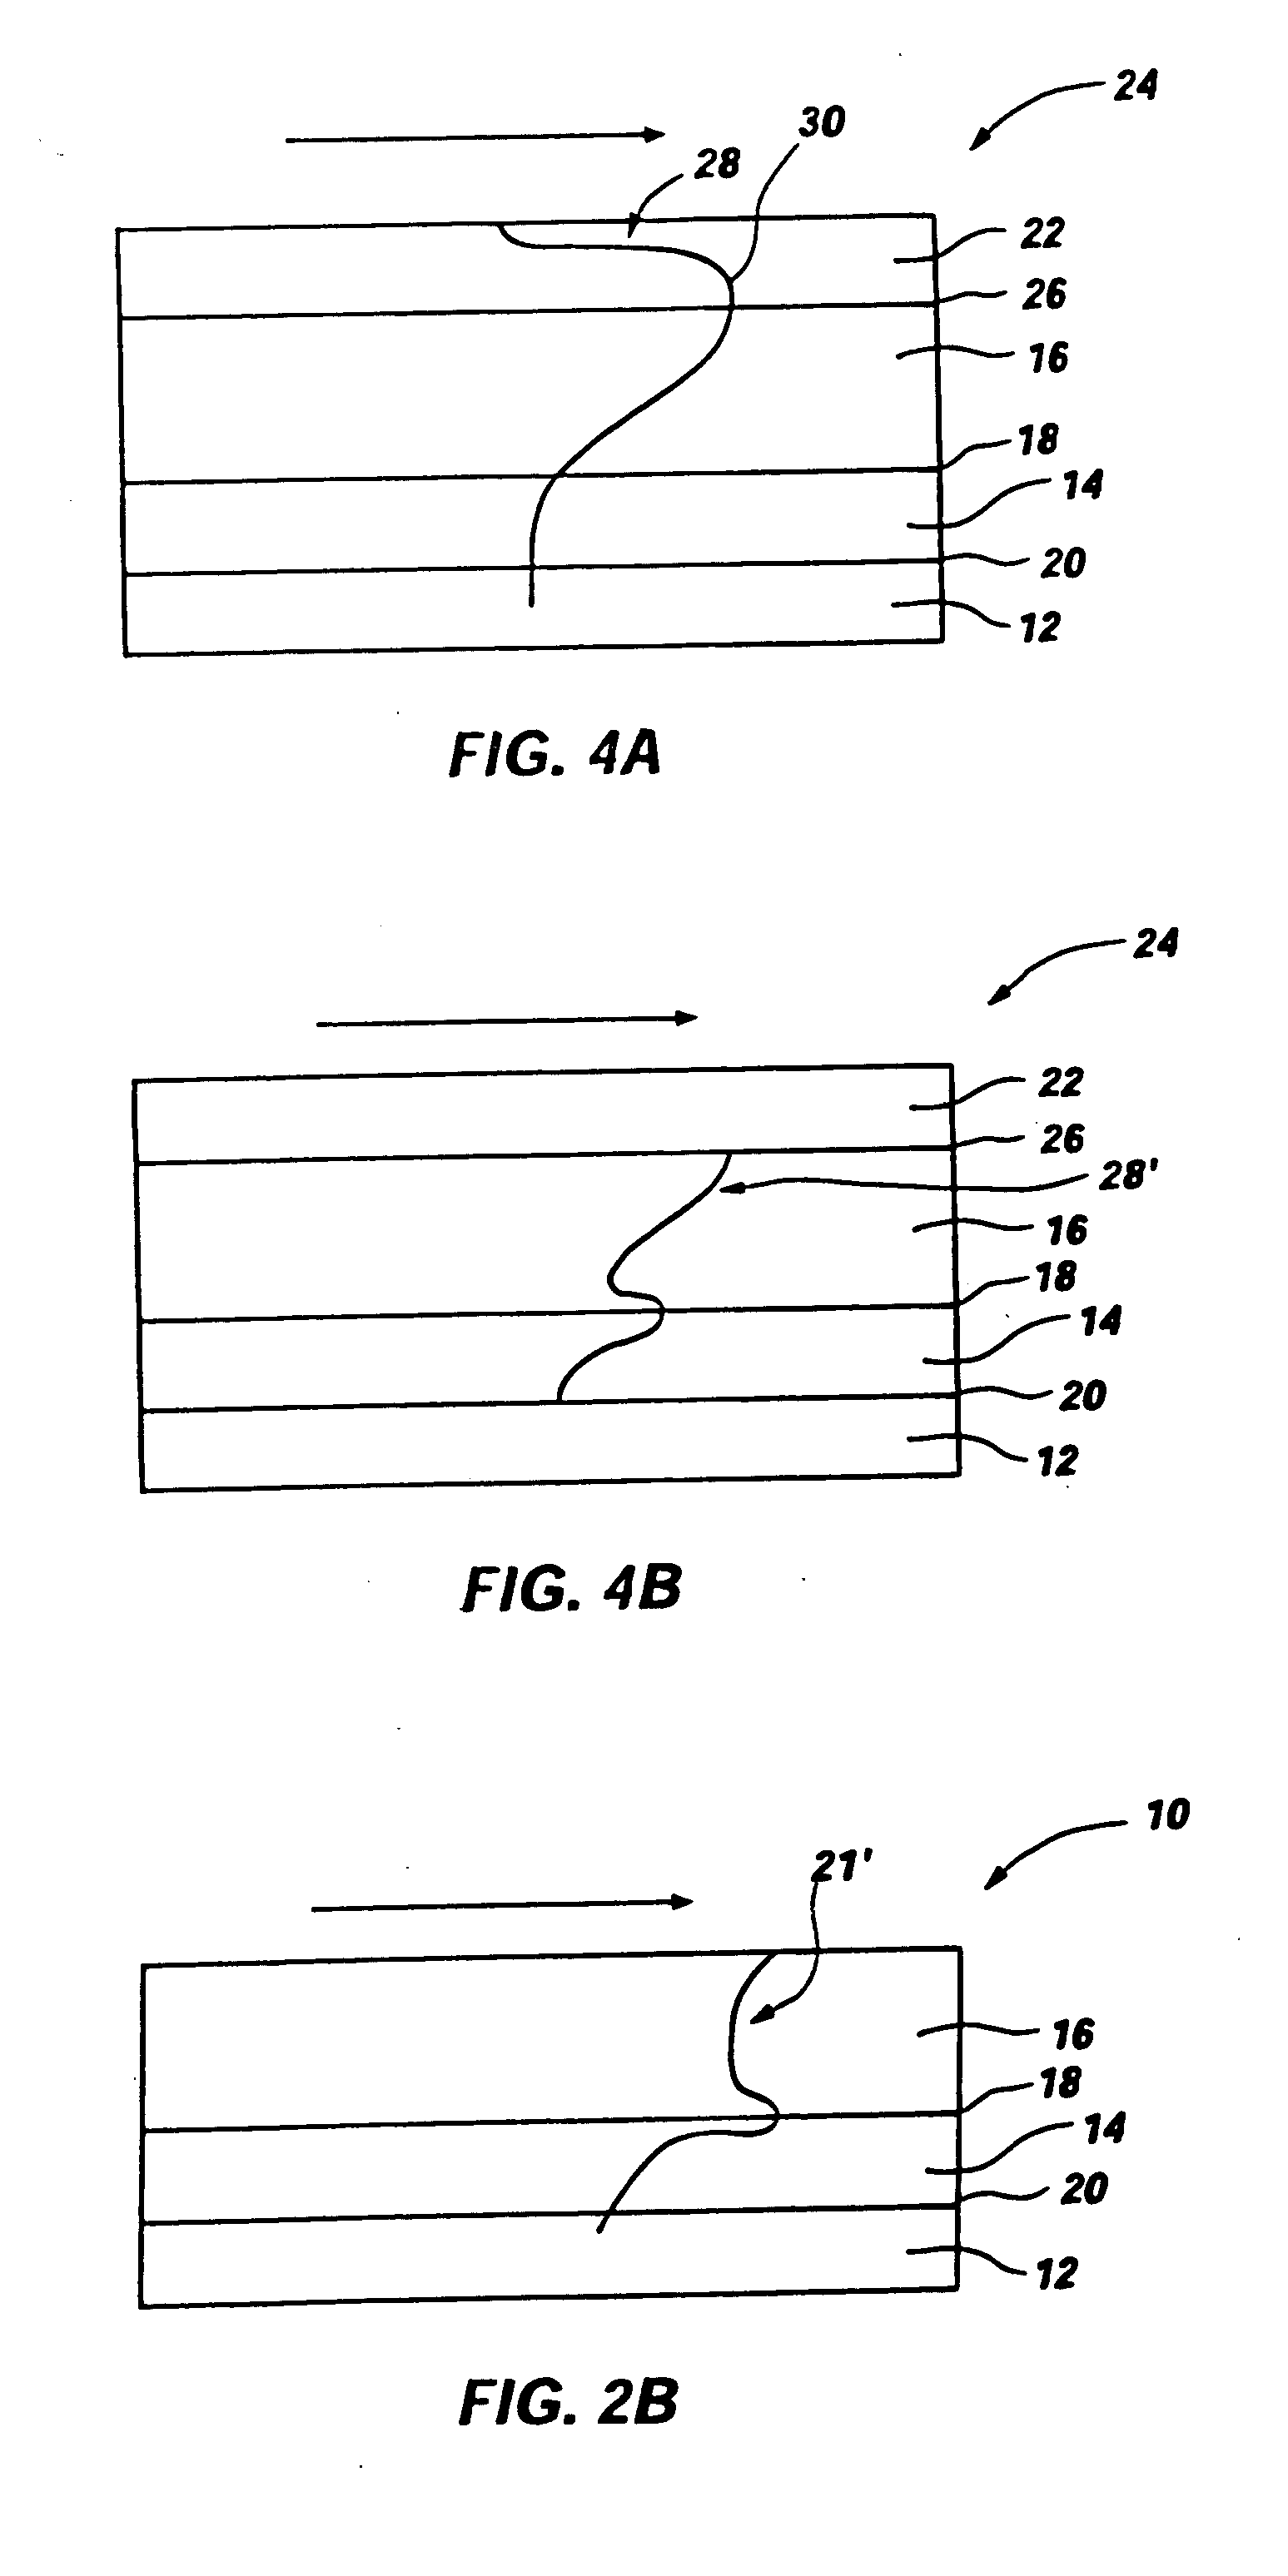 Method for reducing the effective thickness of gate oxides by nitrogen implantation and anneal